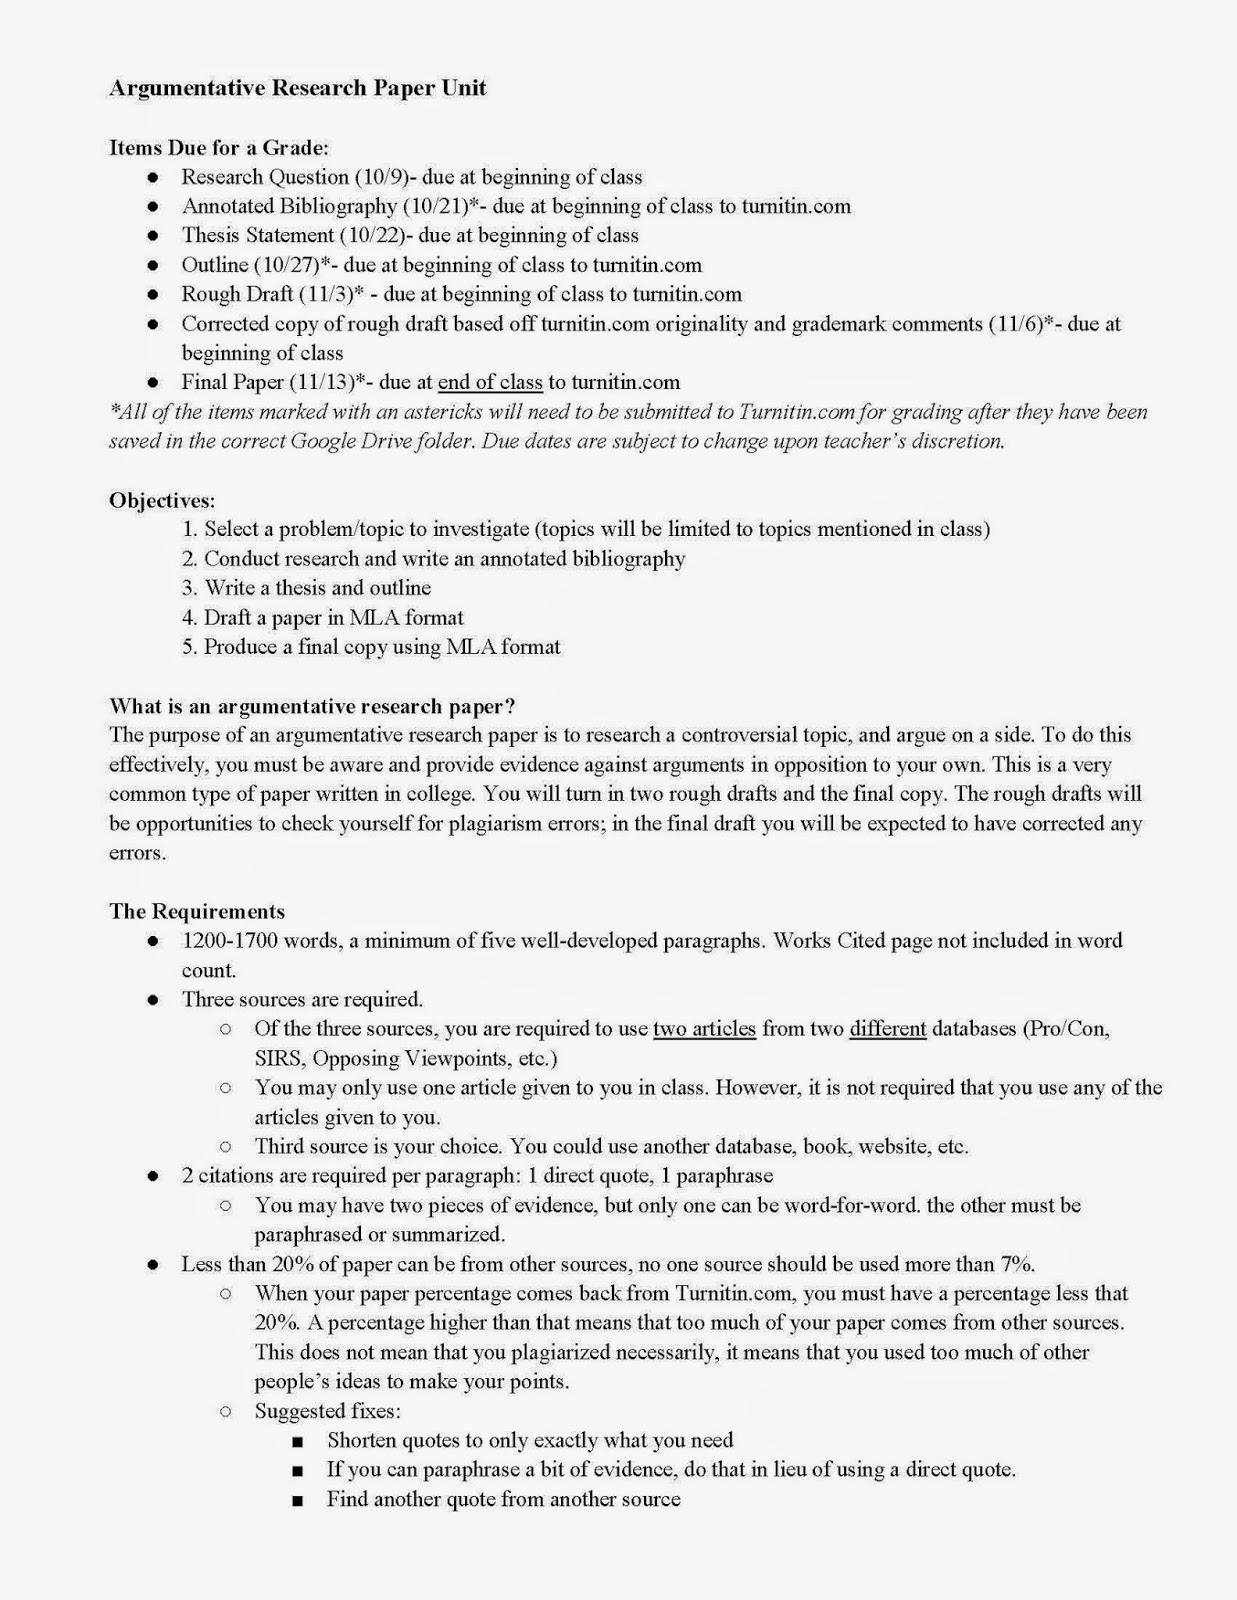 draft an argumentative research essay based on the outline you created in lesson 1